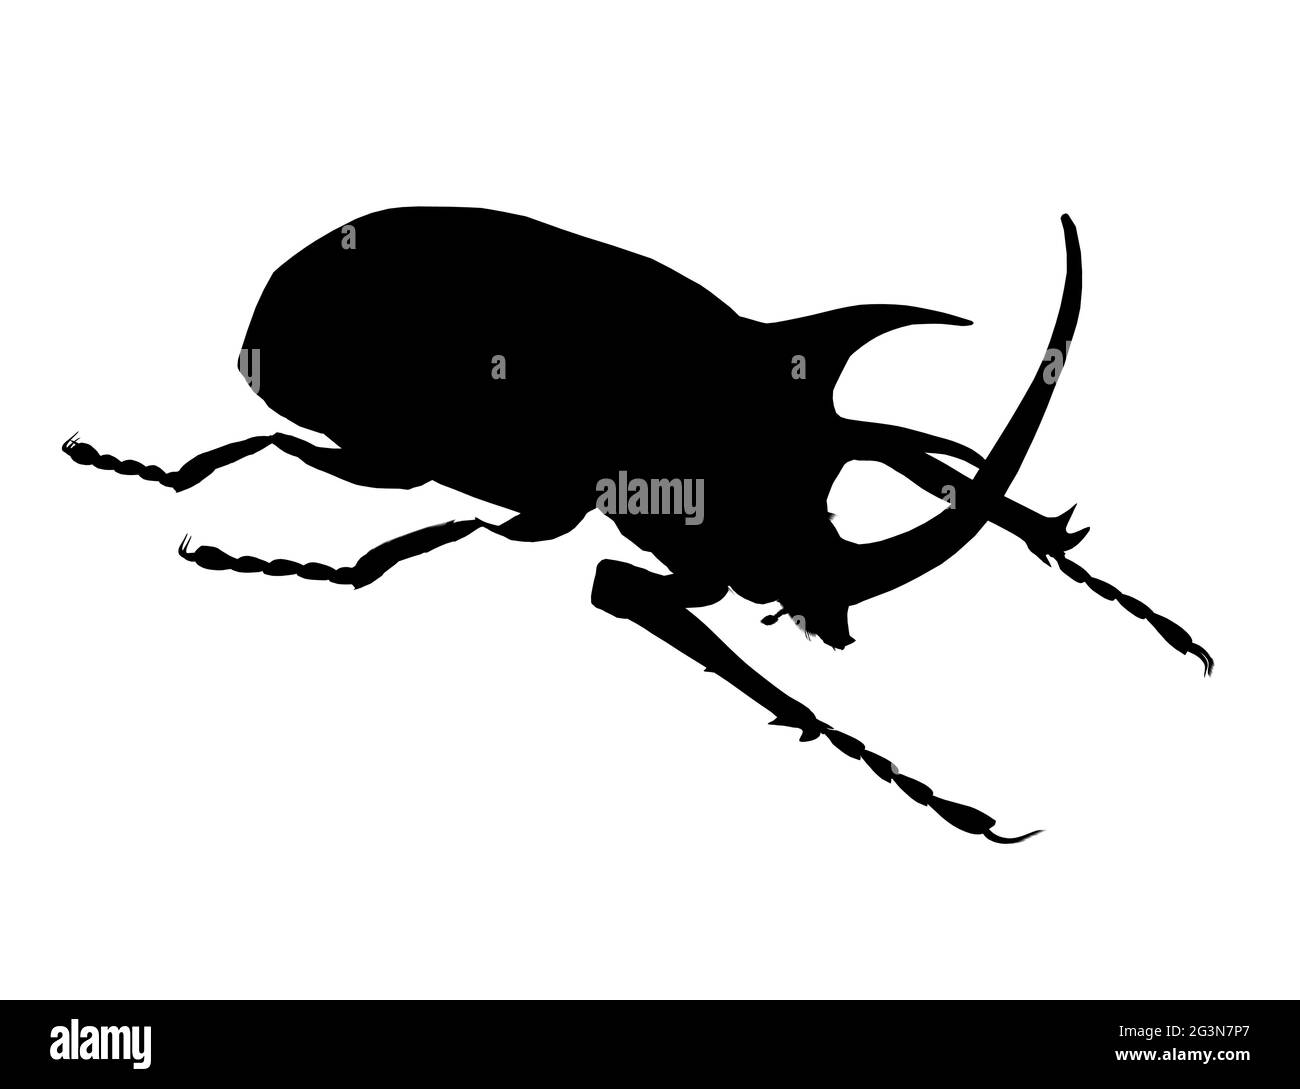 Rhinoceros beetle silhouette isolated on white background. Vector illustration. Stock Vector